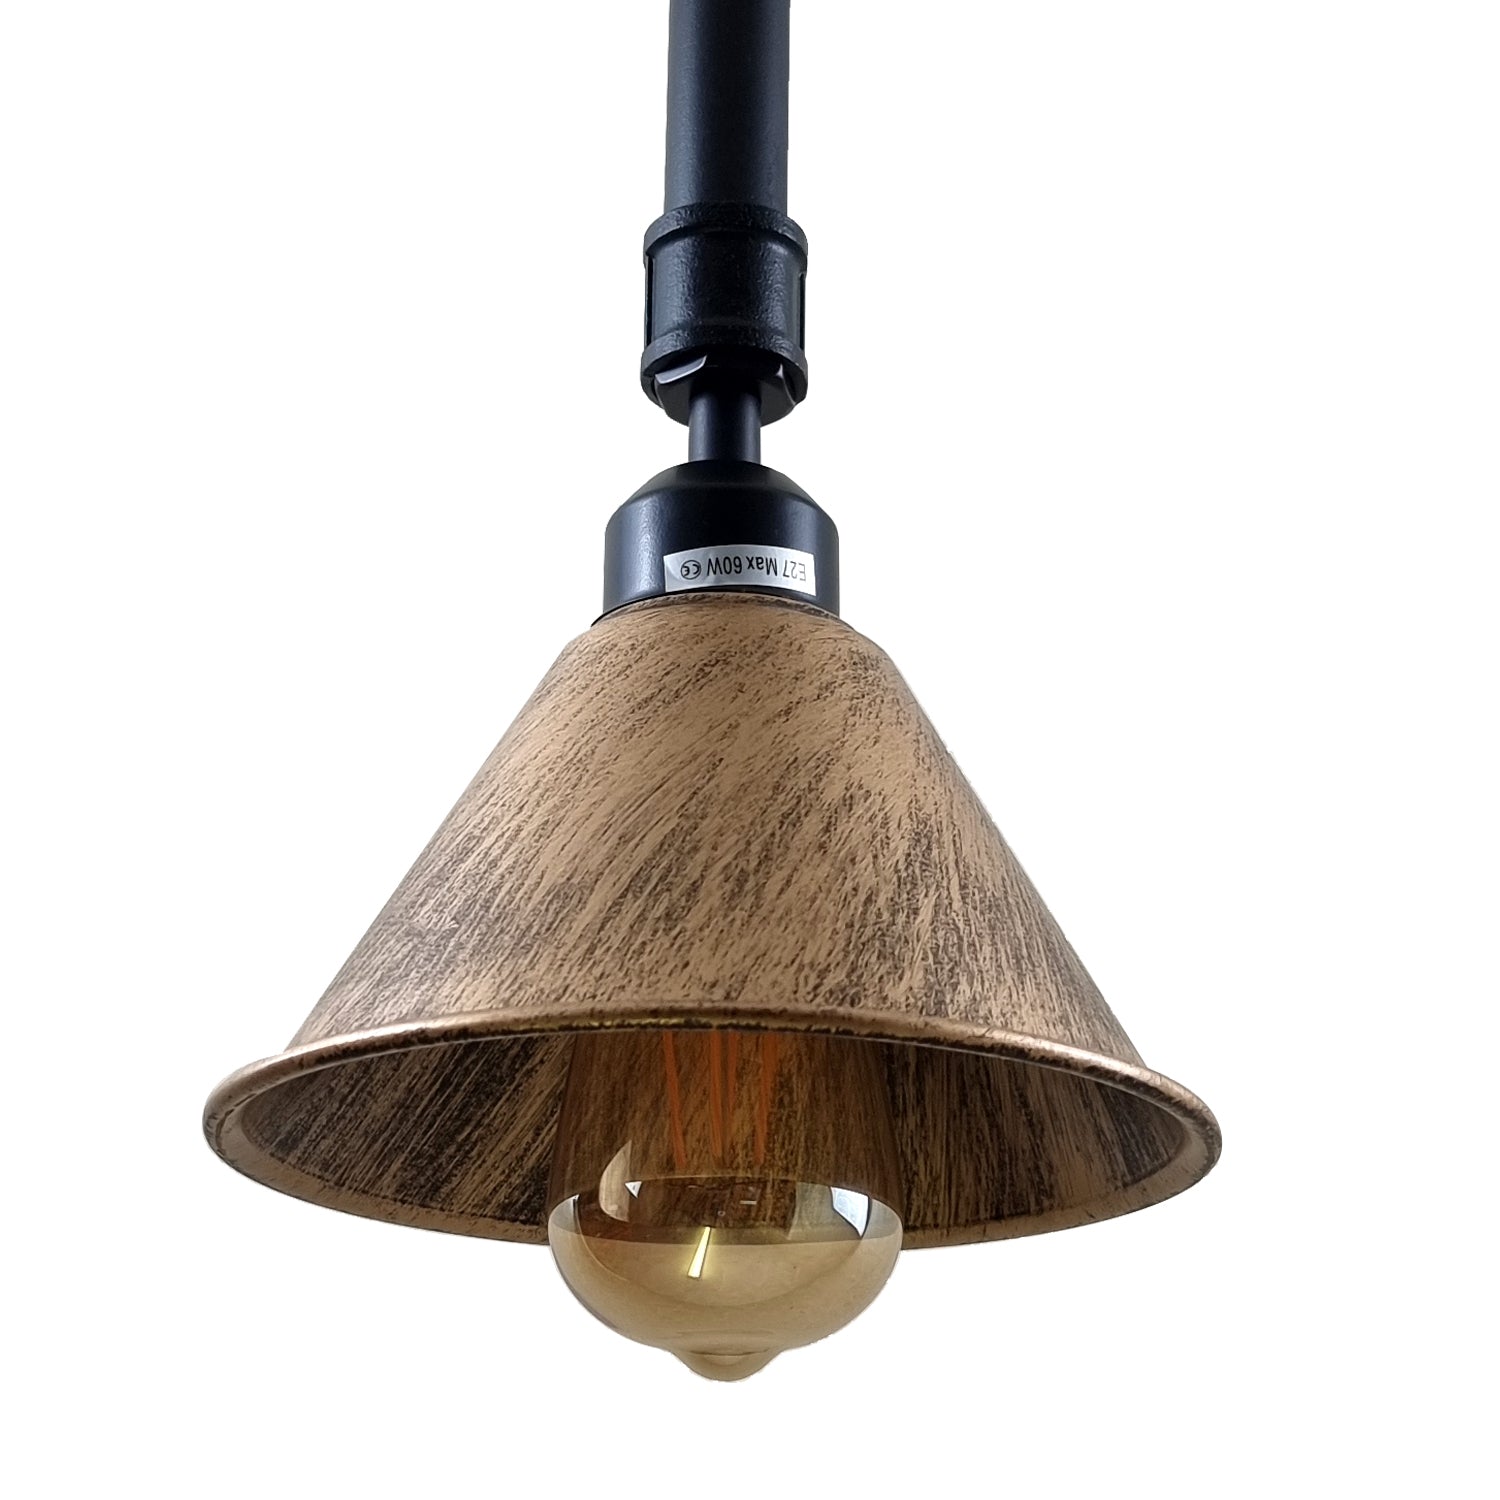 Brushed Copper Metal Lampshade Industrial Retro Lighting Ceiling Light